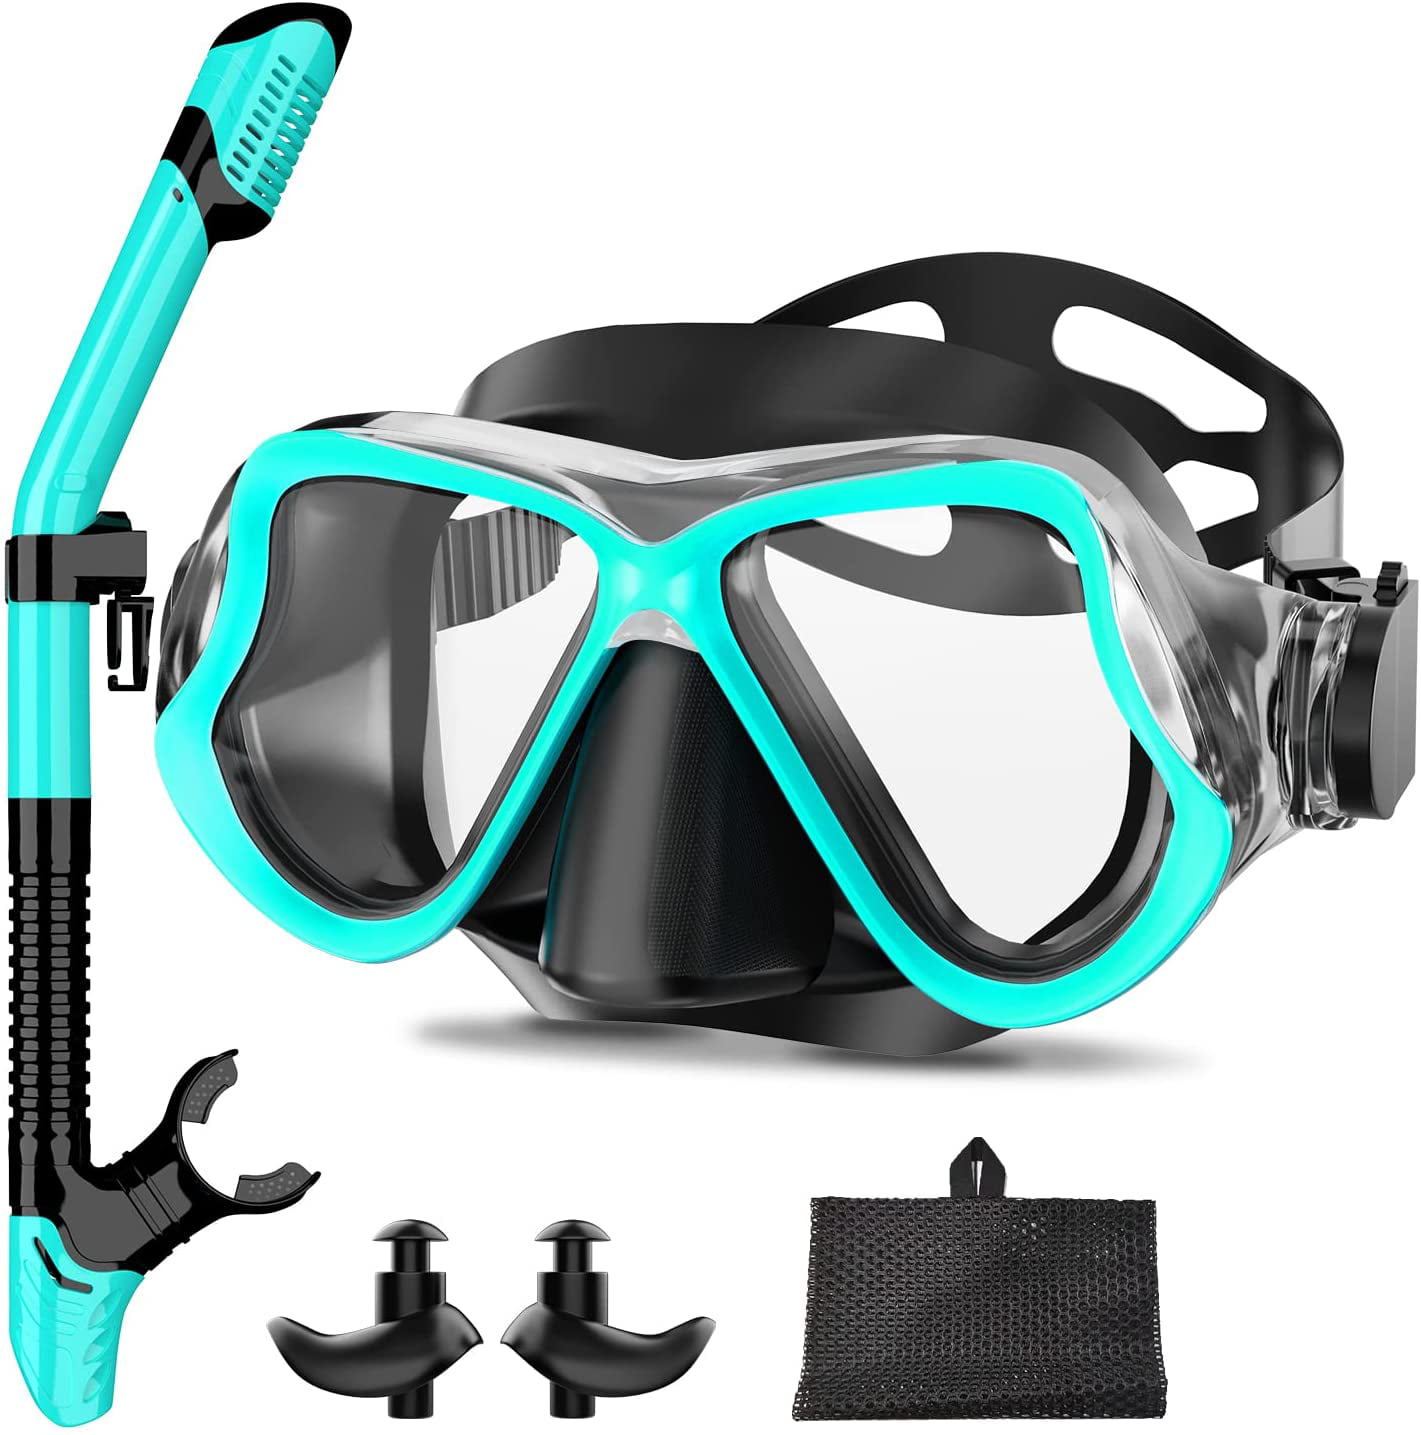 Adult Snorkeling Kit Panoramic Anti-Fog Scuba Mask and Dry Snorkel Tempered Glass Swim Mask Professional Youth Snorkeling Mask Gear for Snorkeling Swimming Diving 